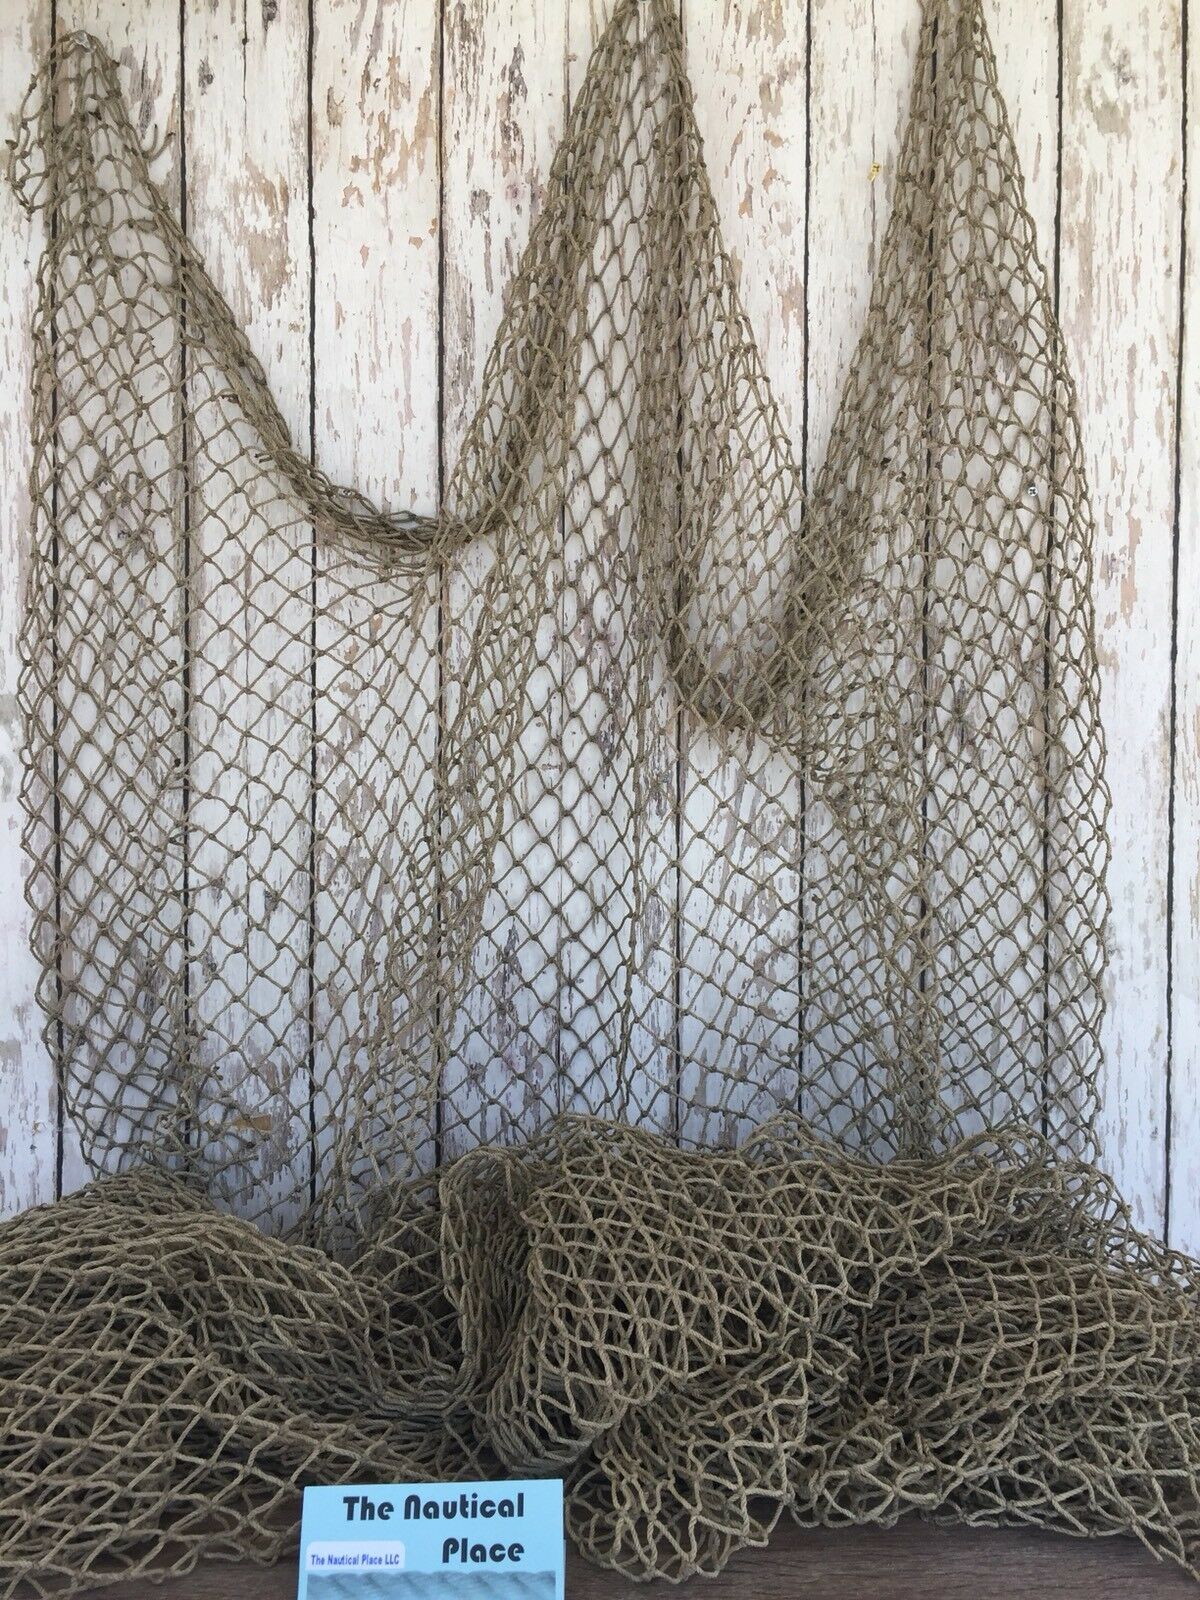 Authentic Used Fishing Net 5'x10' ~ Commercial Fish Netting ~ Old Vintage Decor